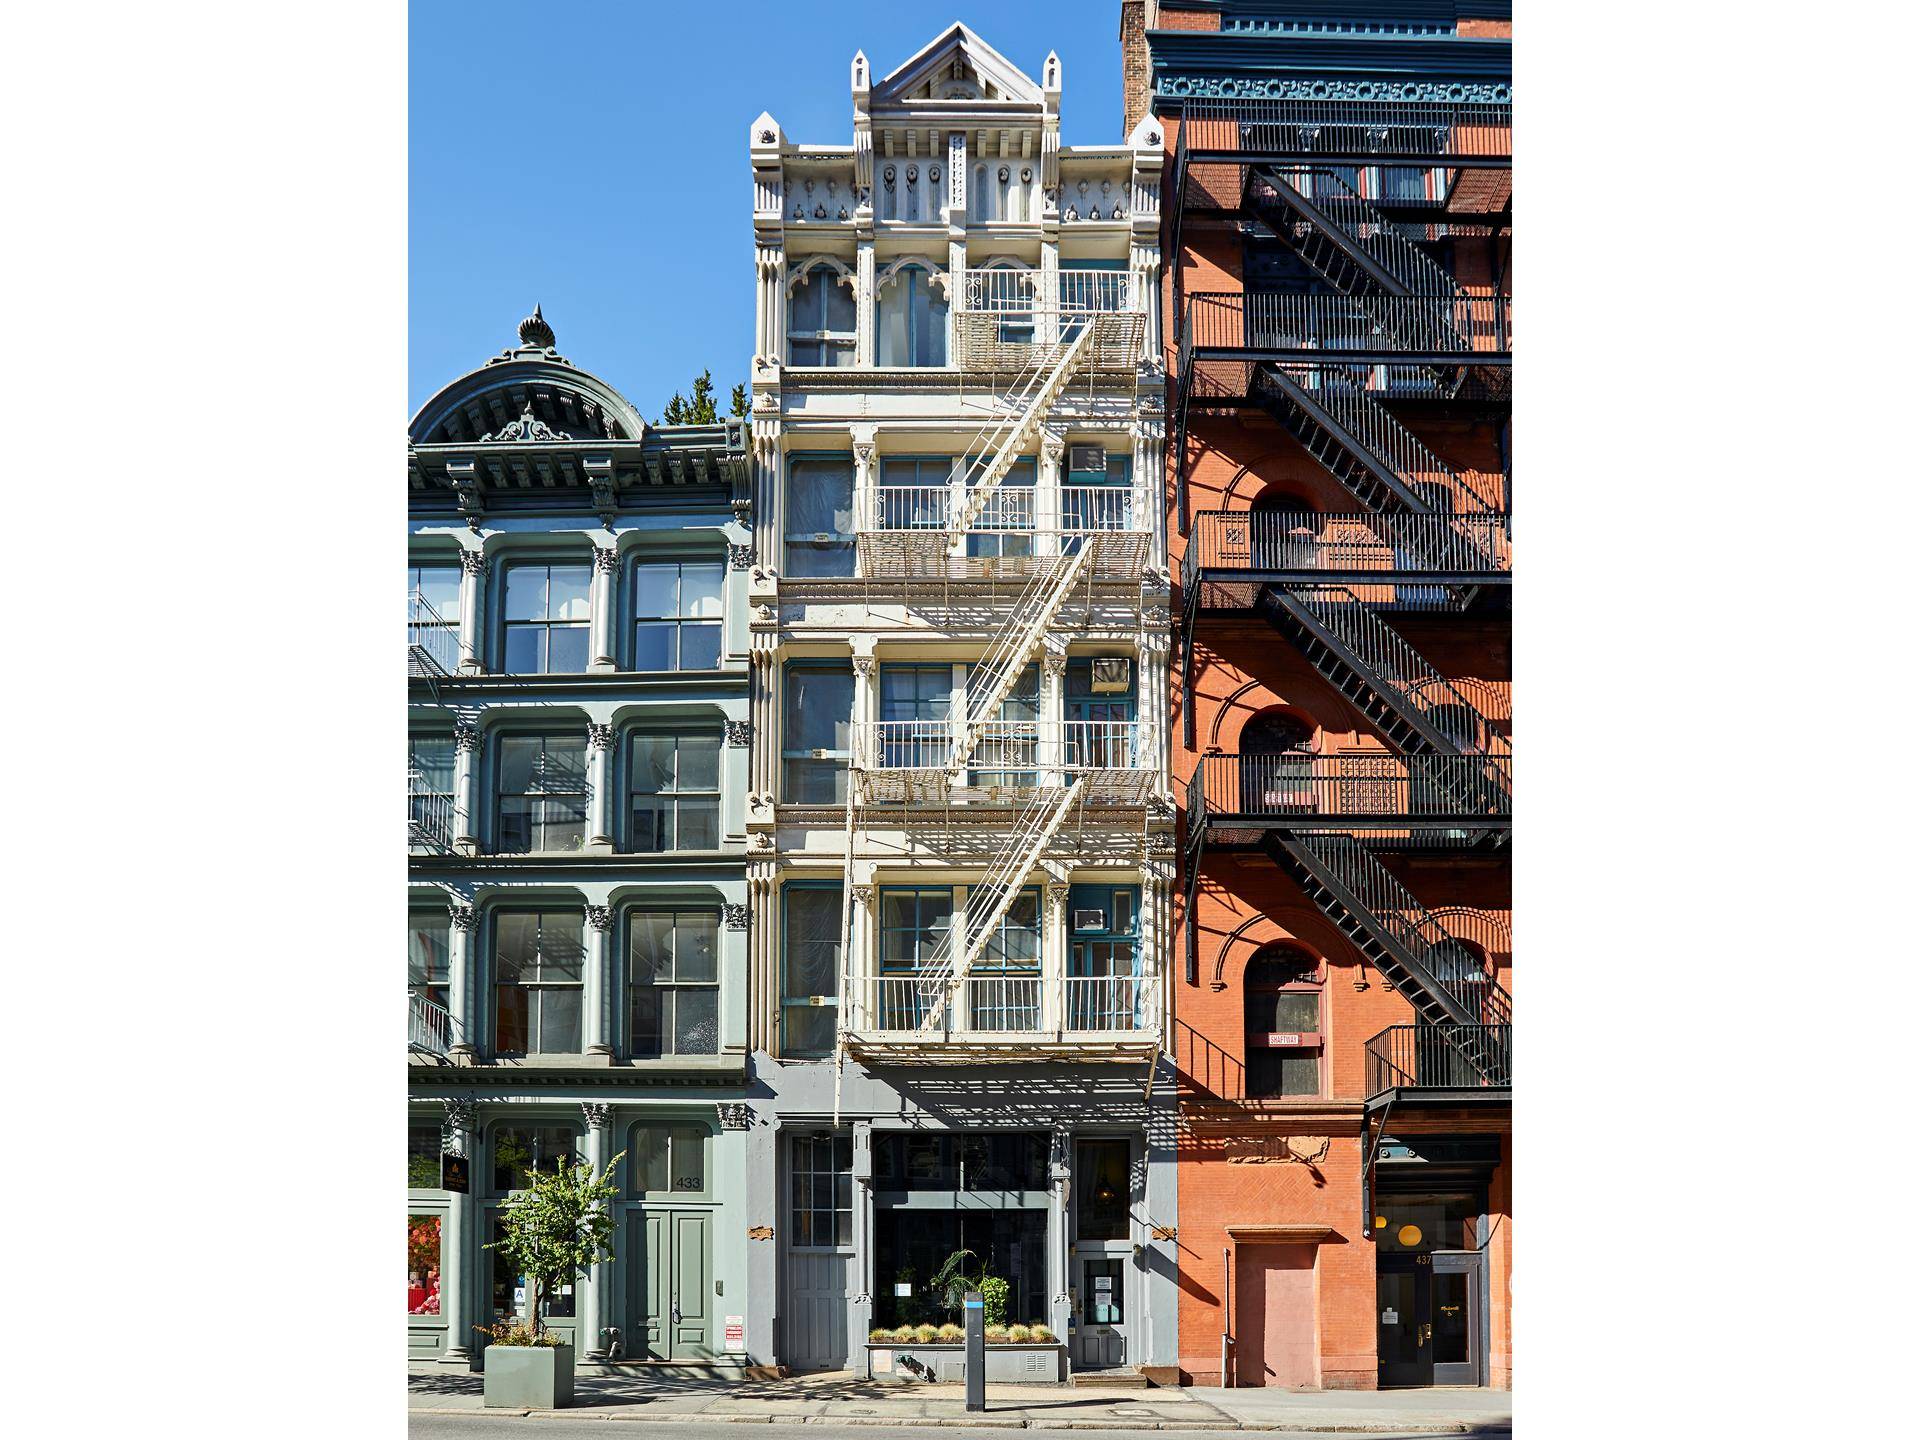 This SoHo historic Cast Iron building offers a variety of opportunities for repositioning retail, office, or residential mixed use.